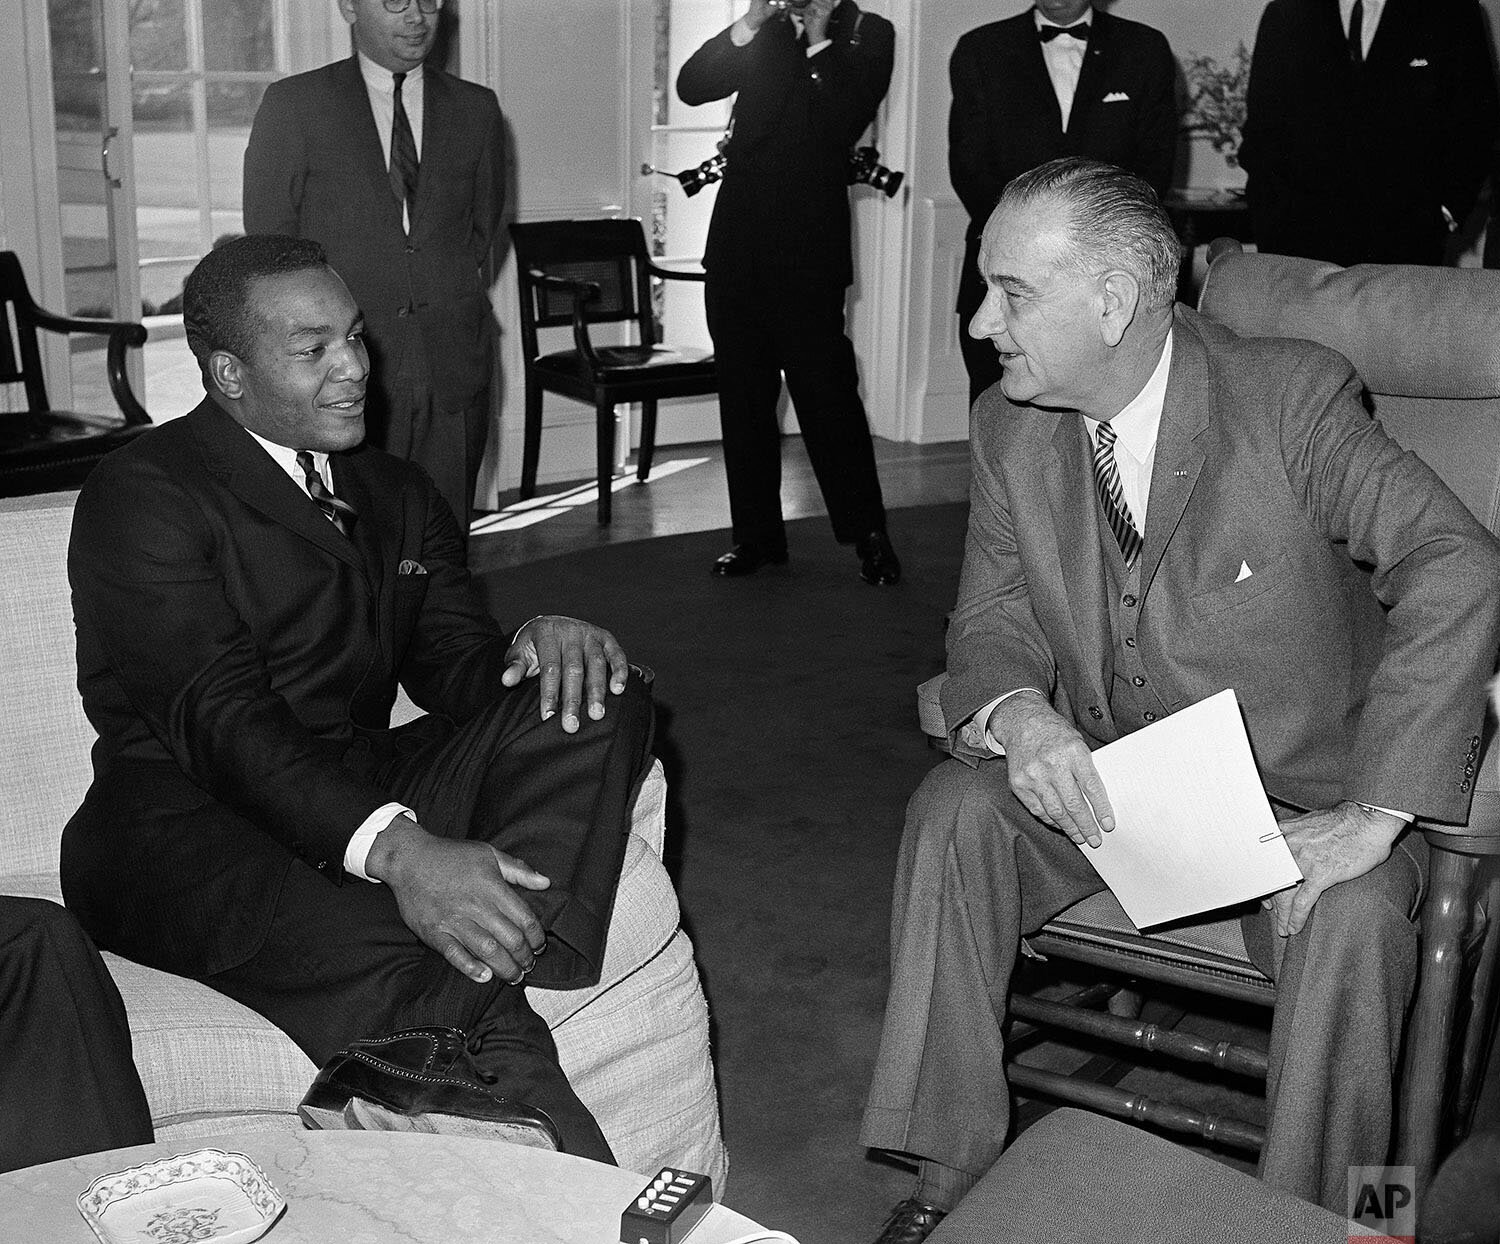  U.S. President Lyndon B. Johnson talks with fullback Jim Brown of the Cleveland Brown professional football team at the  White House office December 16, 1963. Brown, who gained more than a mile during the 1963 season, and his teammates defeated the 